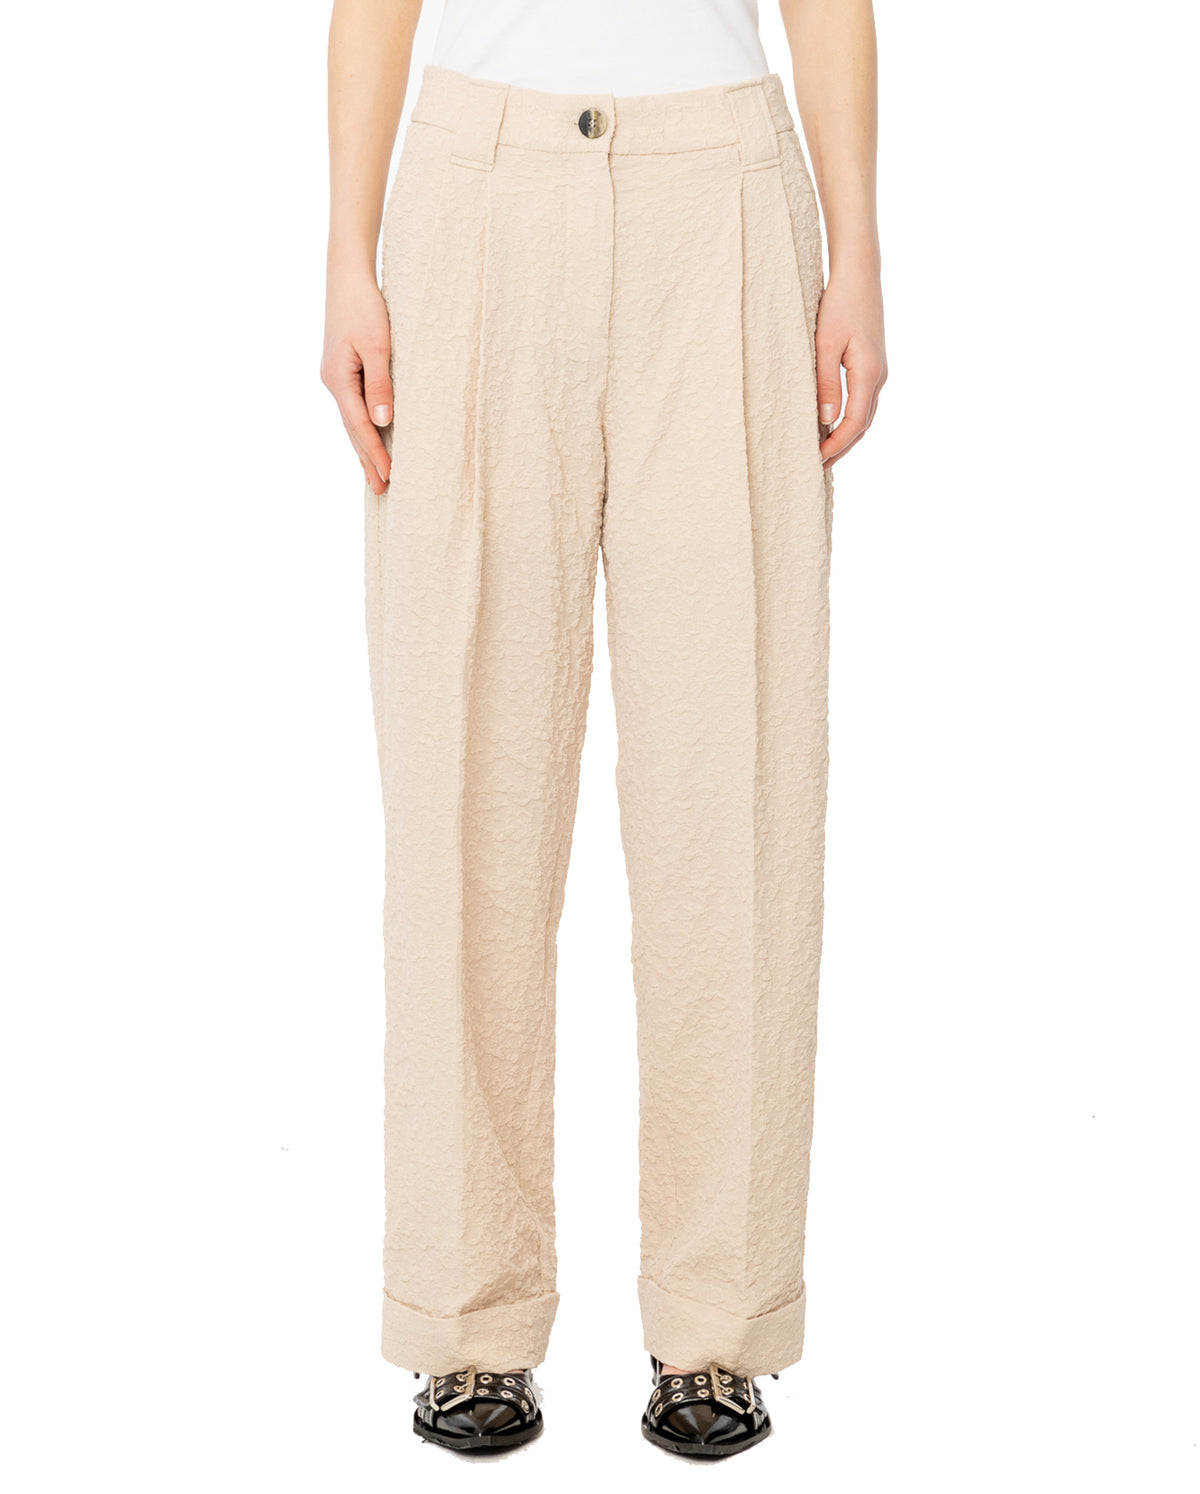 Textured Suiting Mid Waist Pants